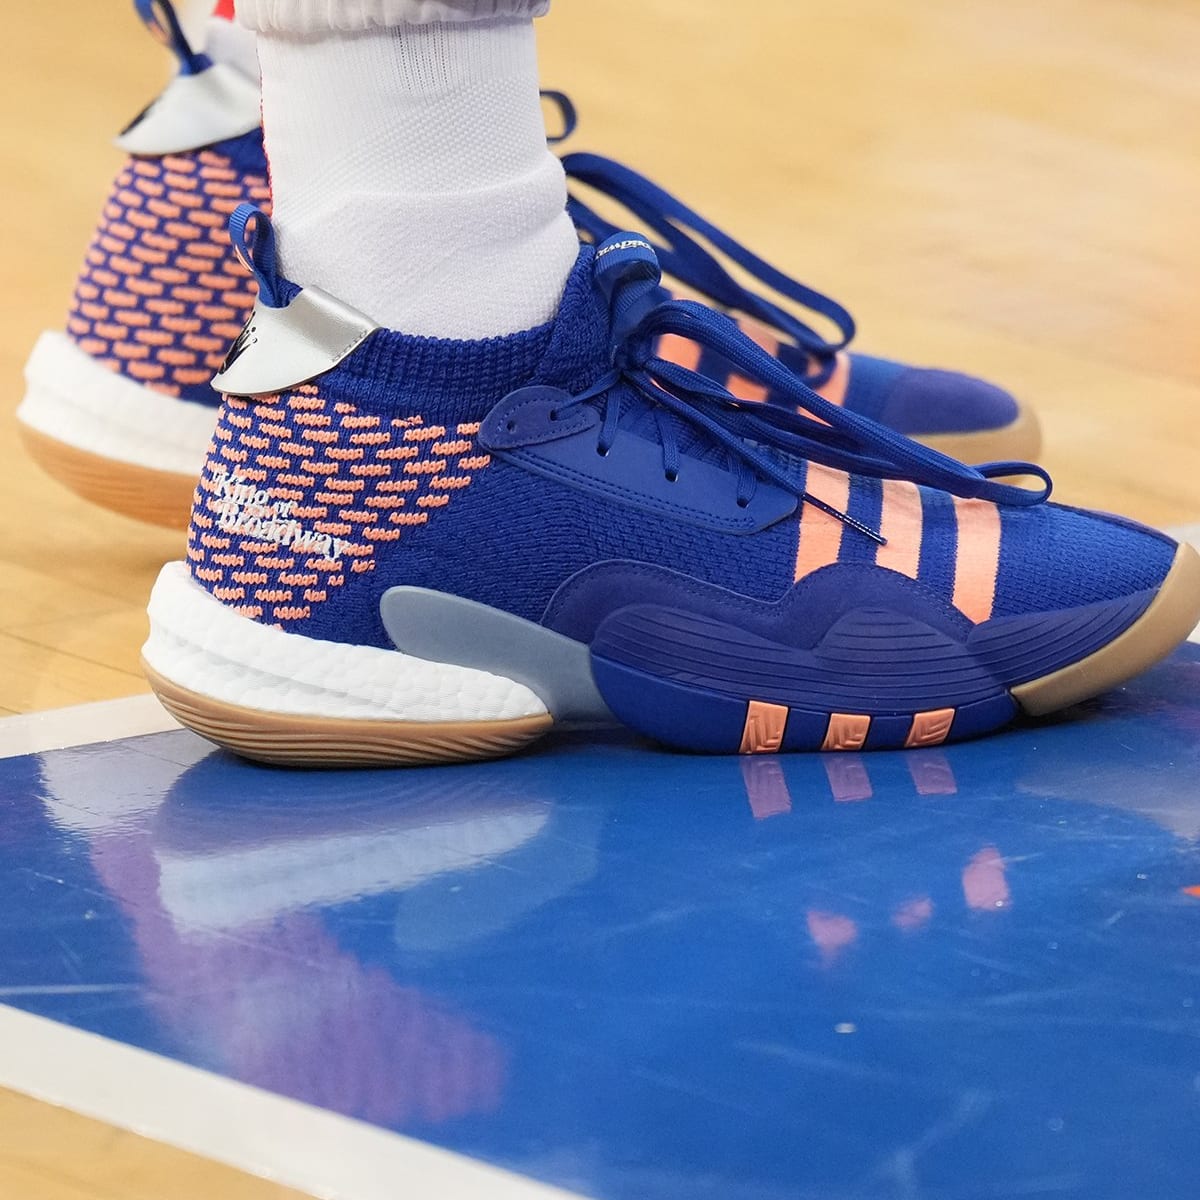 New York Knicks Clap at Trae Young's Shoes - Illustrated FanNation Kicks News, Analysis and More